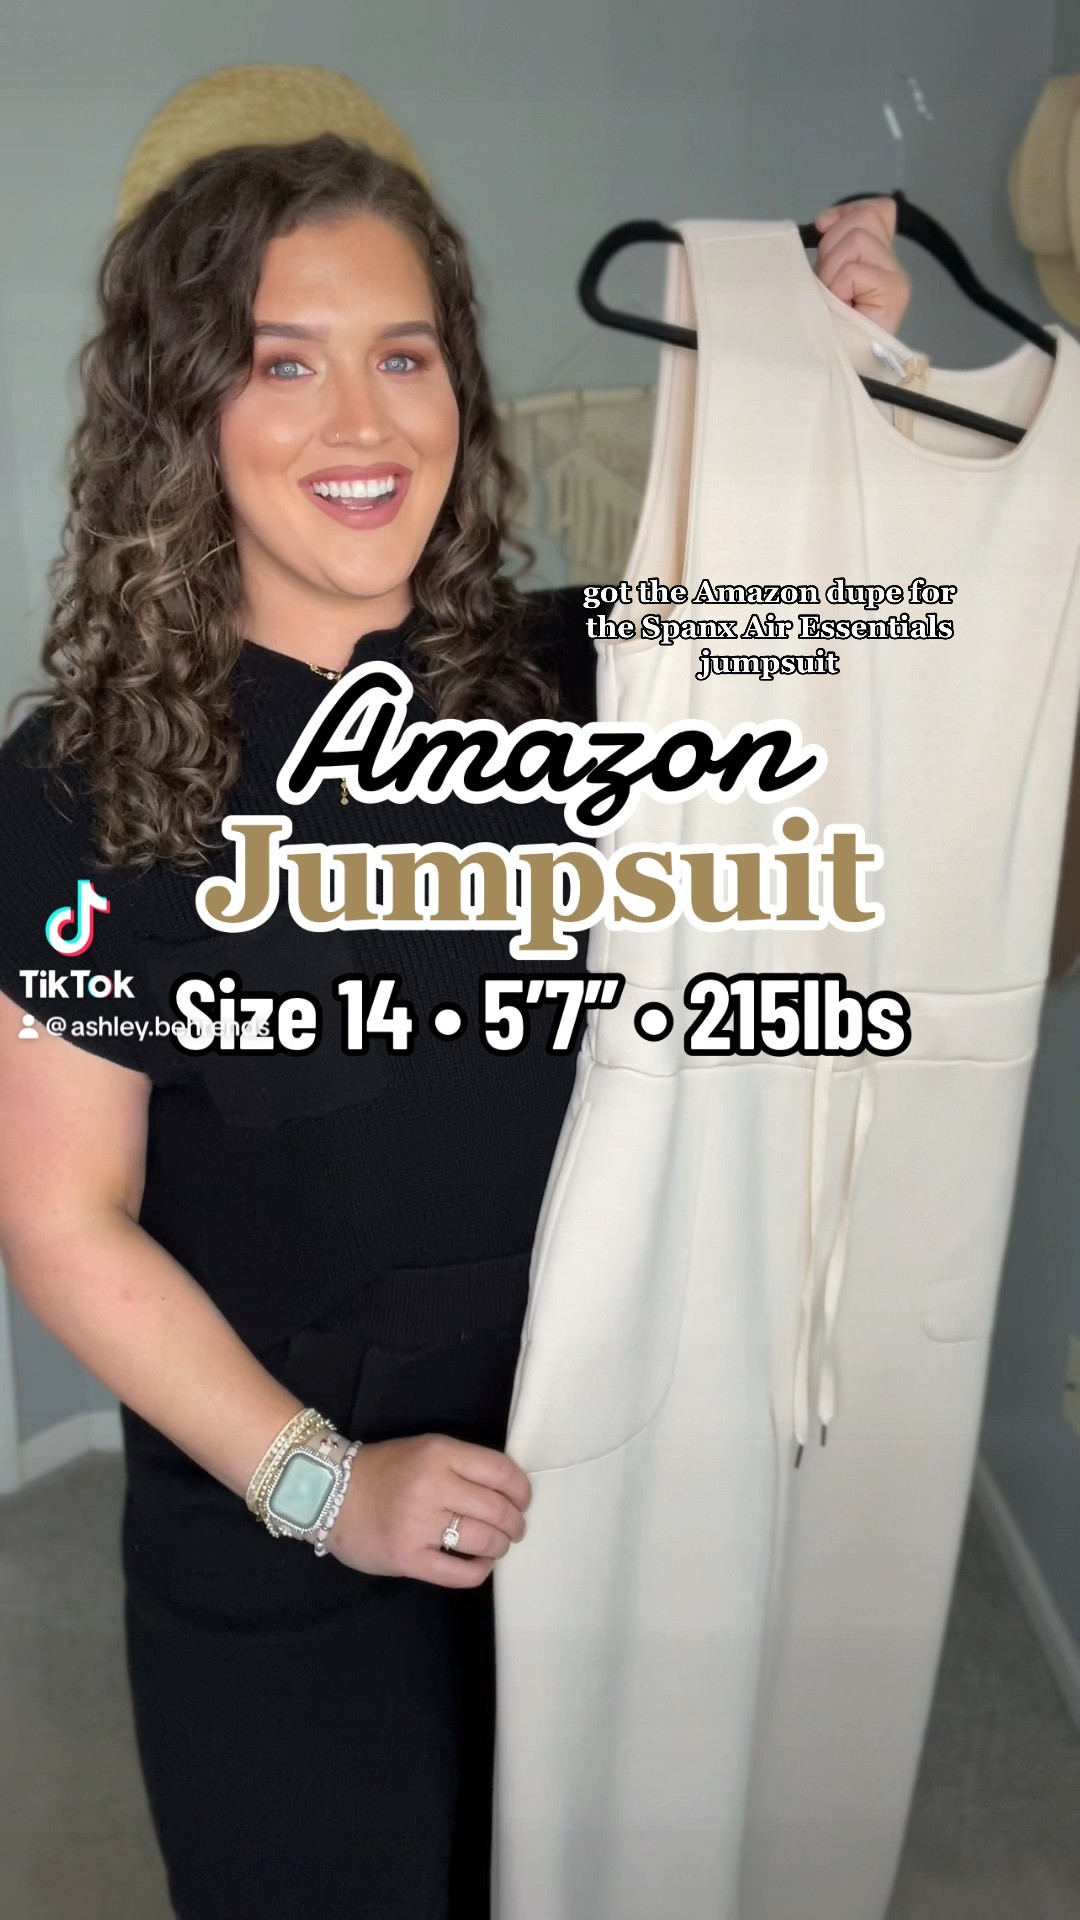 Air Essentials Jumpsuit for Women … curated on LTK